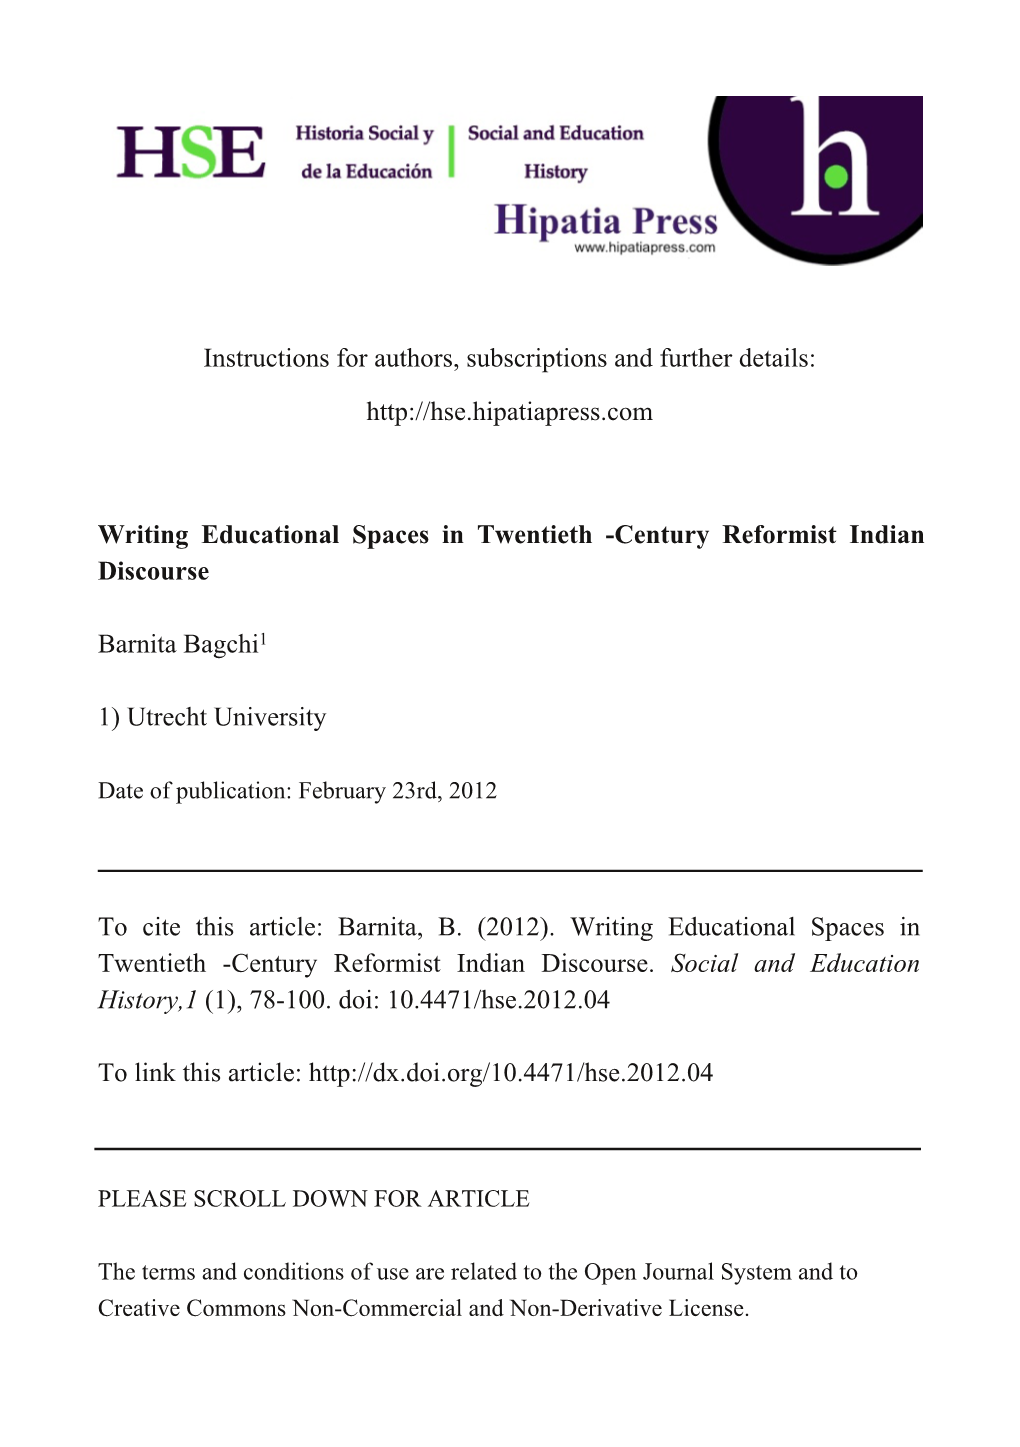 Instructions for Authors, Subscriptions and Further Details: Writing Educational Spaces in Twentieth